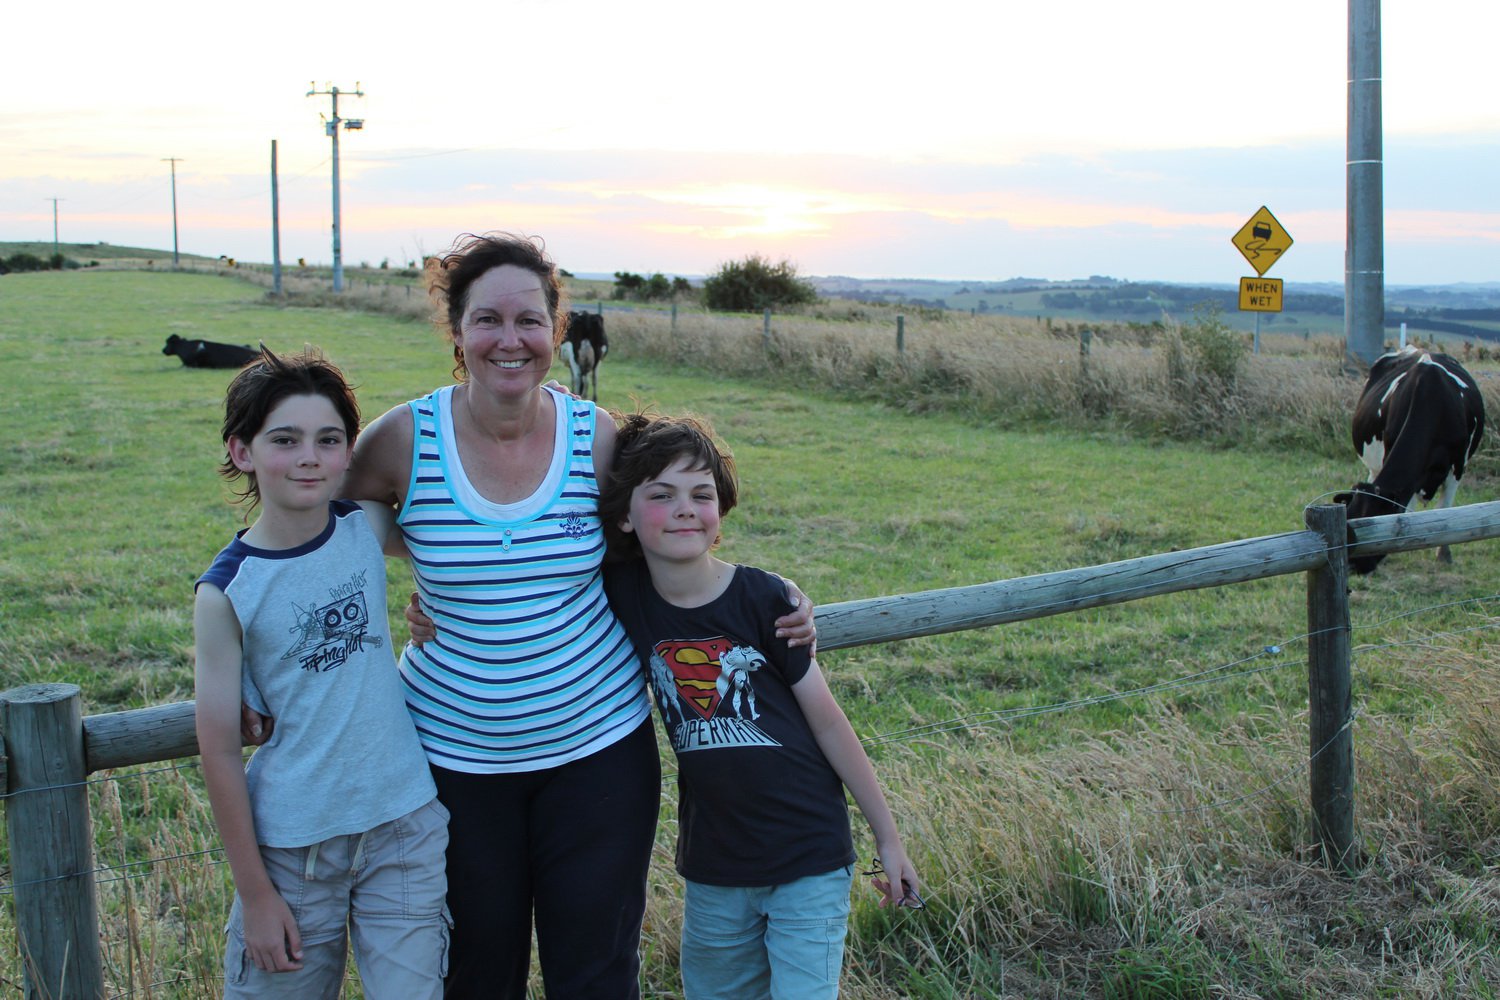 Kyle, Karen and Connor. New Years Break at Inverloch for 2011/2012.